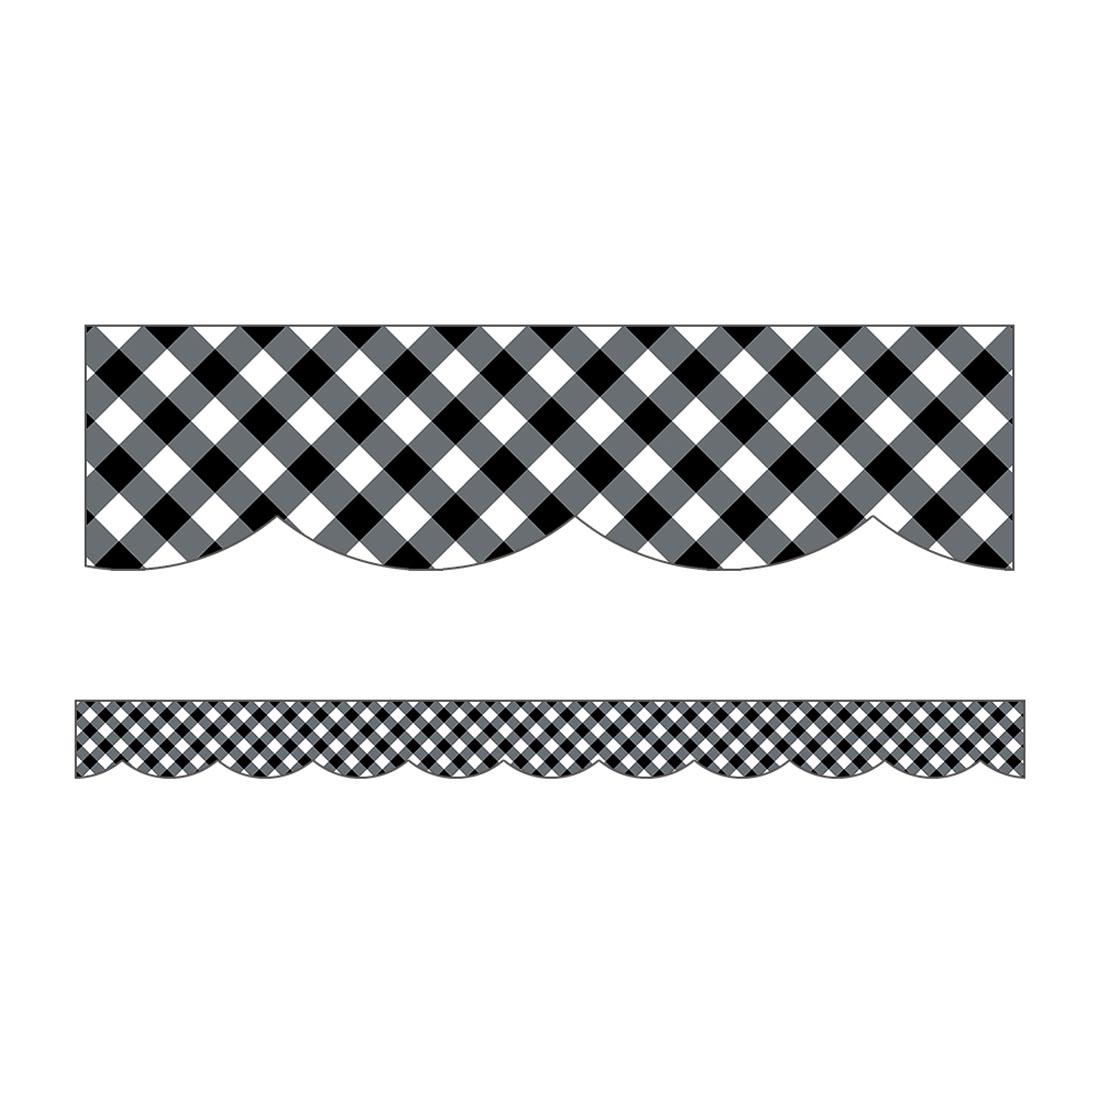 Black & White Gingham Scalloped Borders from the Woodland Whimsy collection